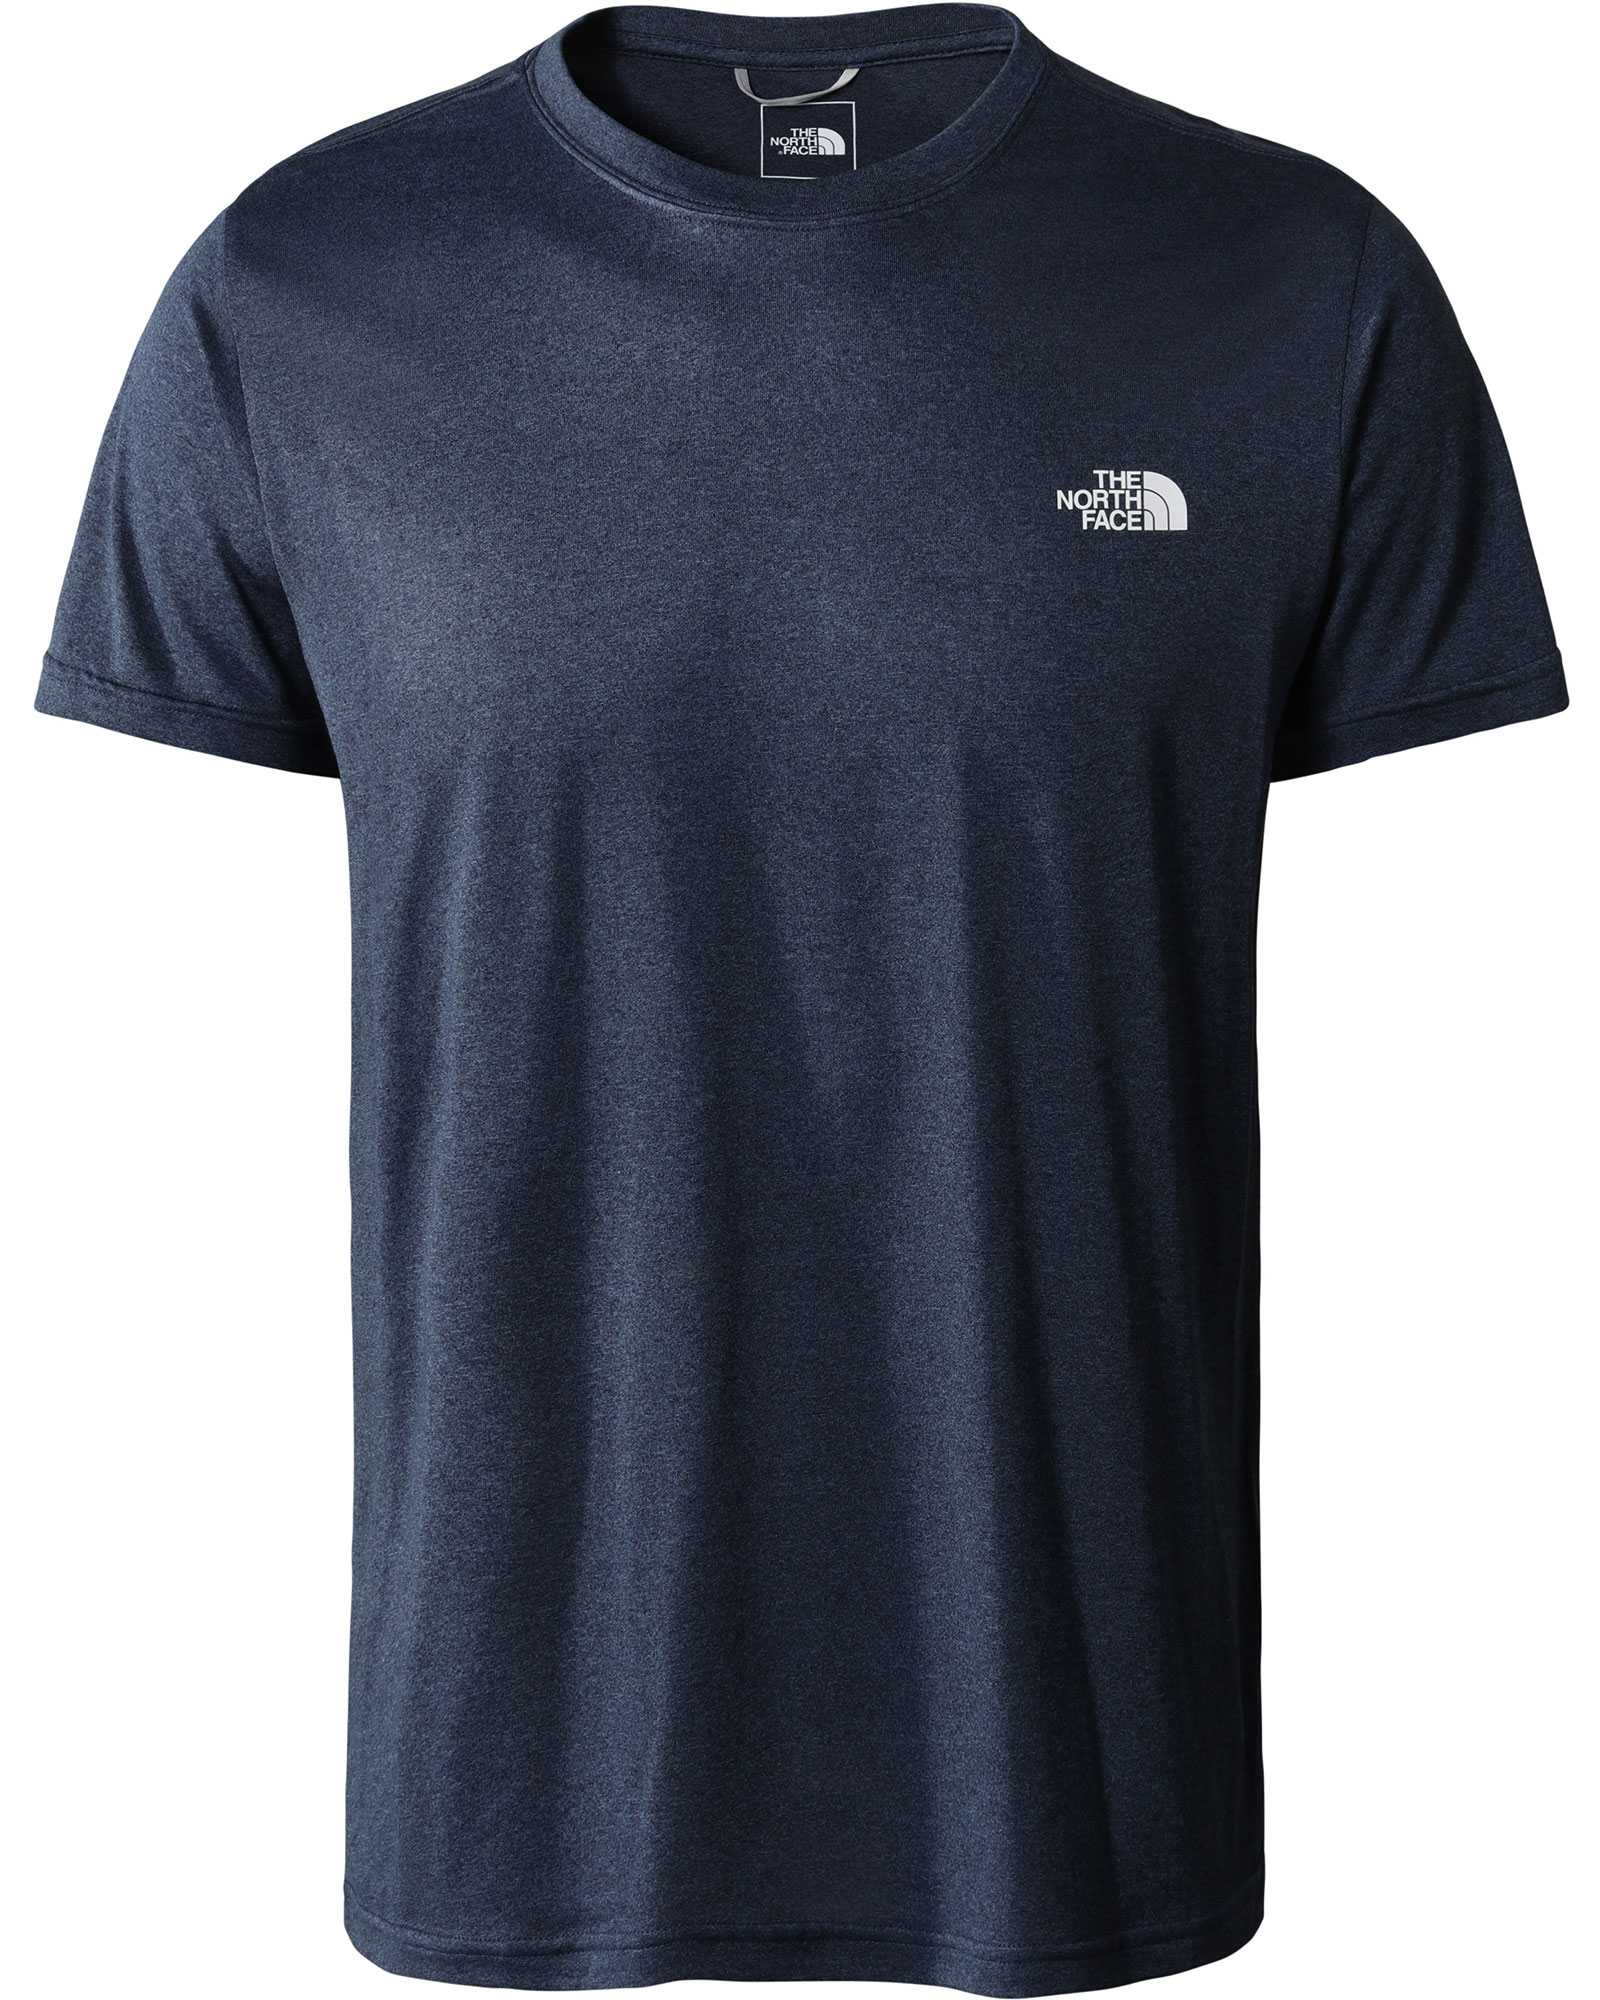 The North Face Reaxion Amp Men’s Crew T Shirt - Shady Blue Heather XXL